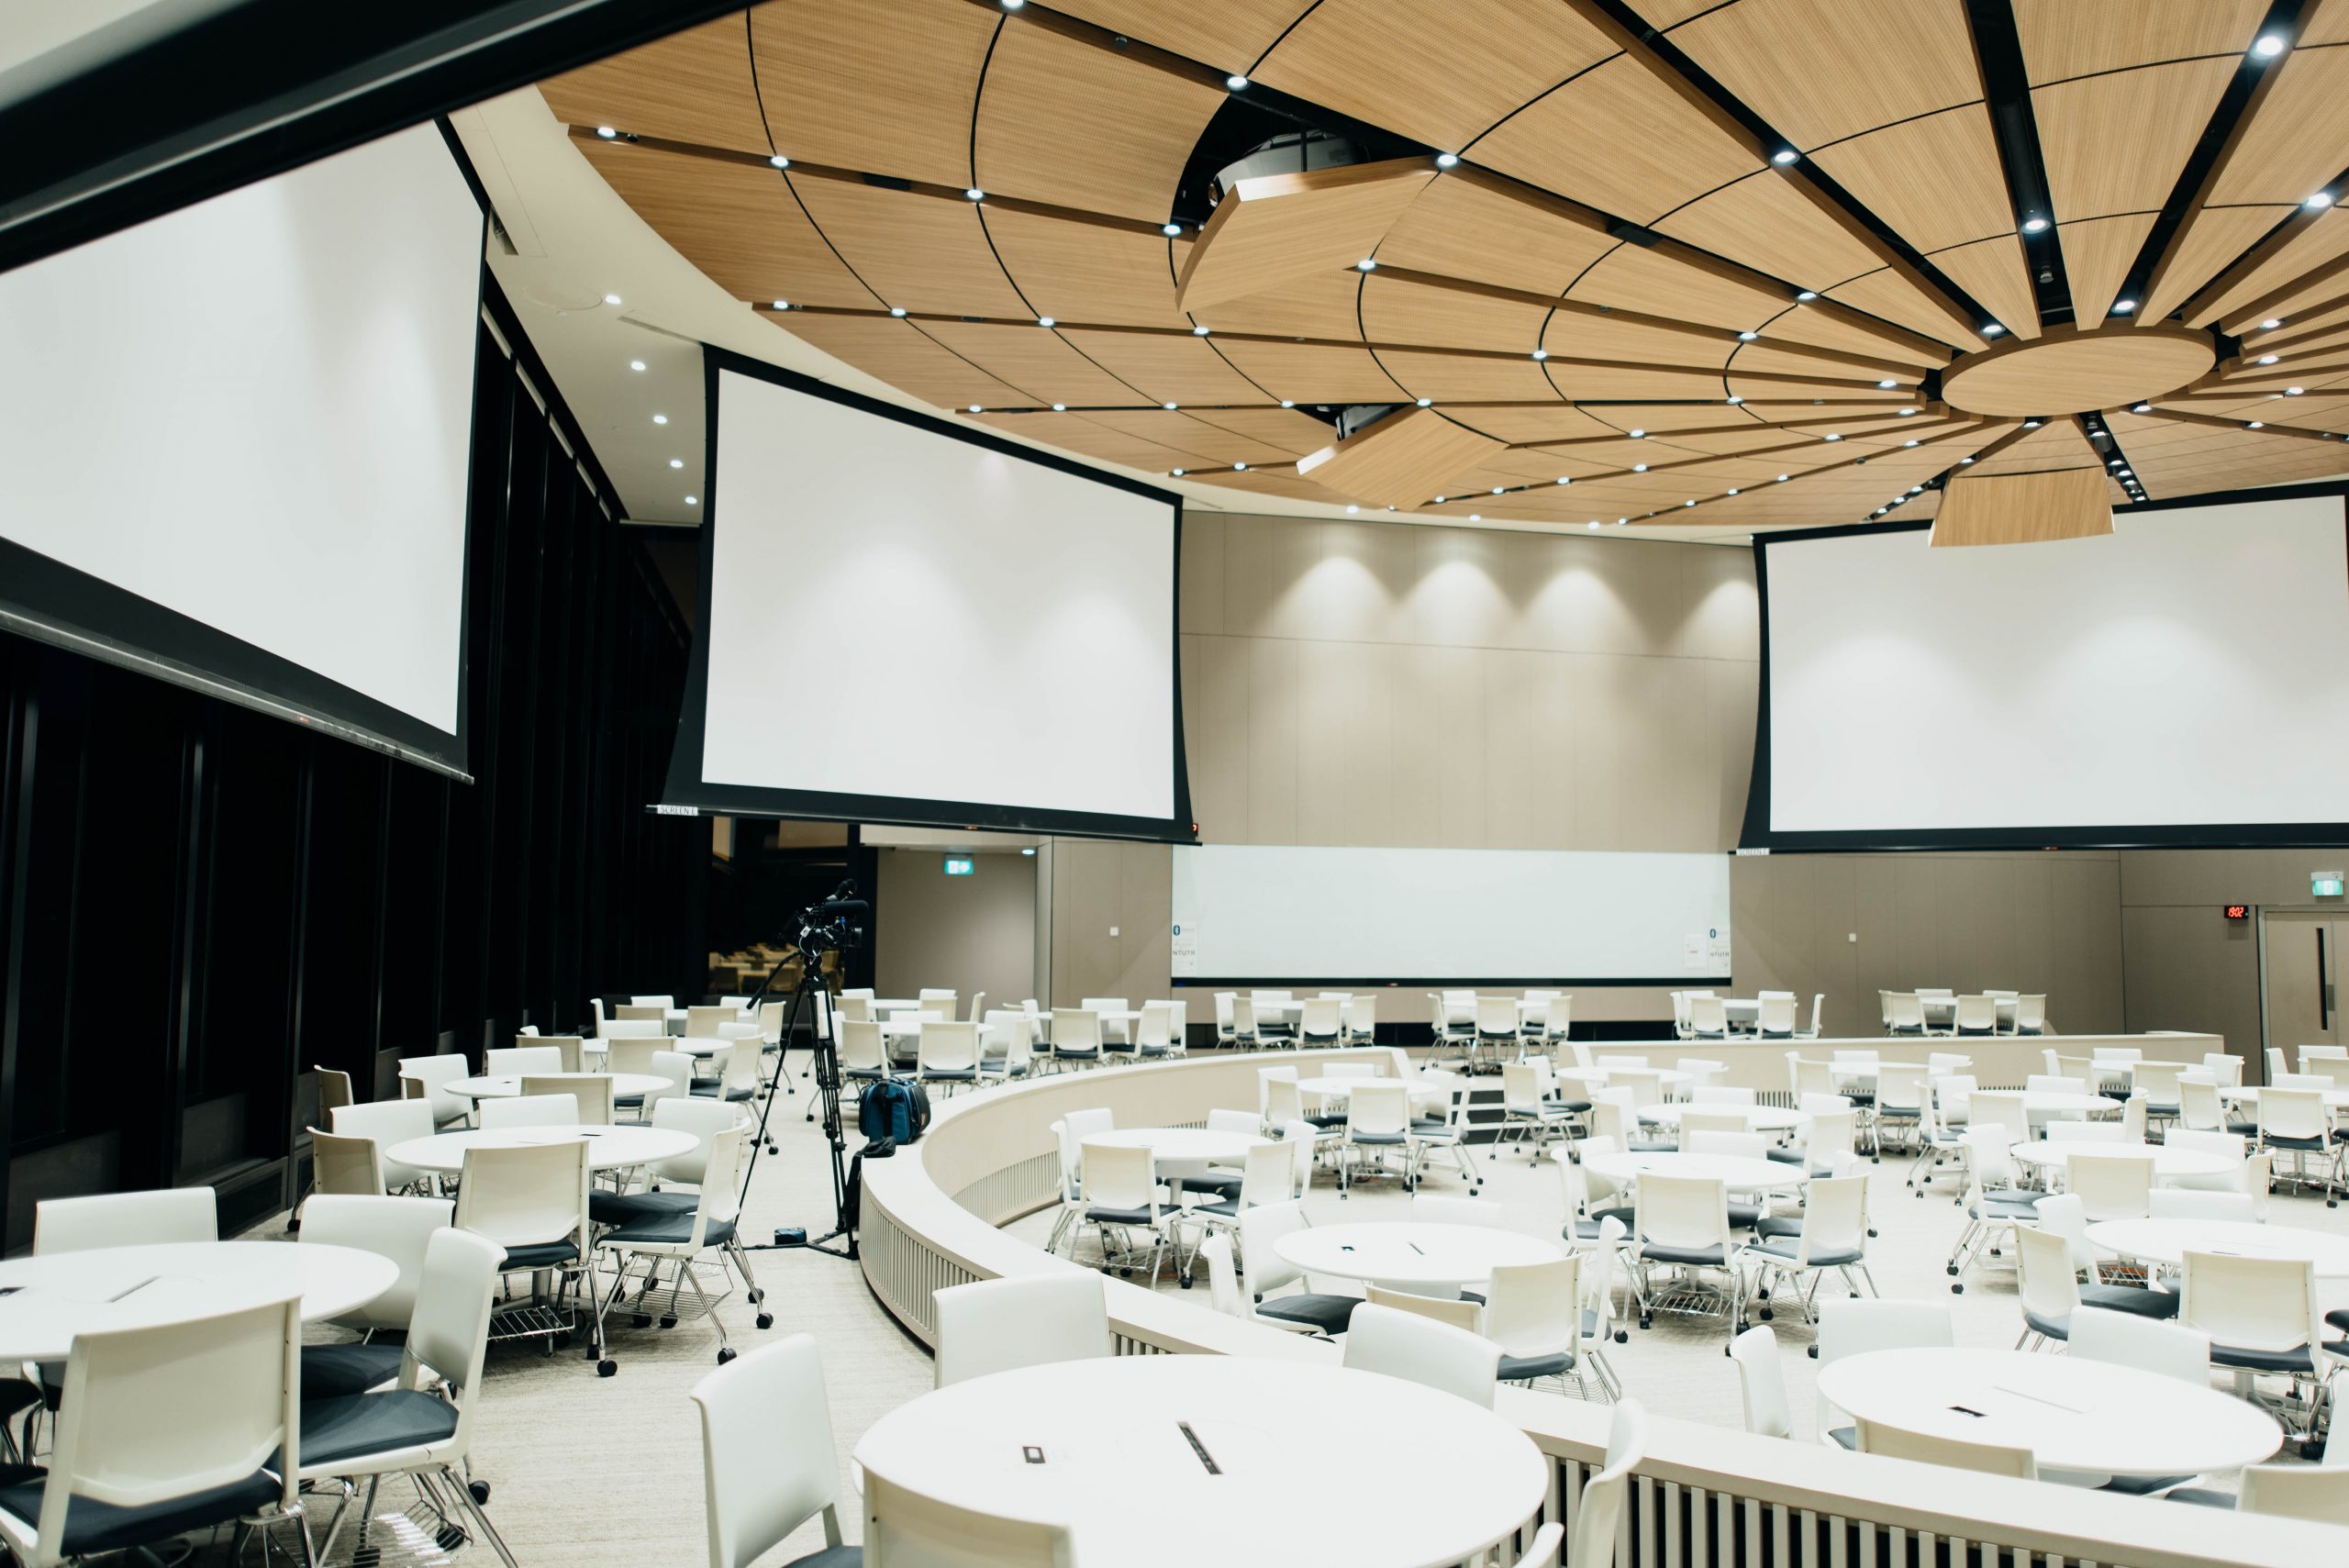 Event Planning: Some Points to Consider When Selecting Venue